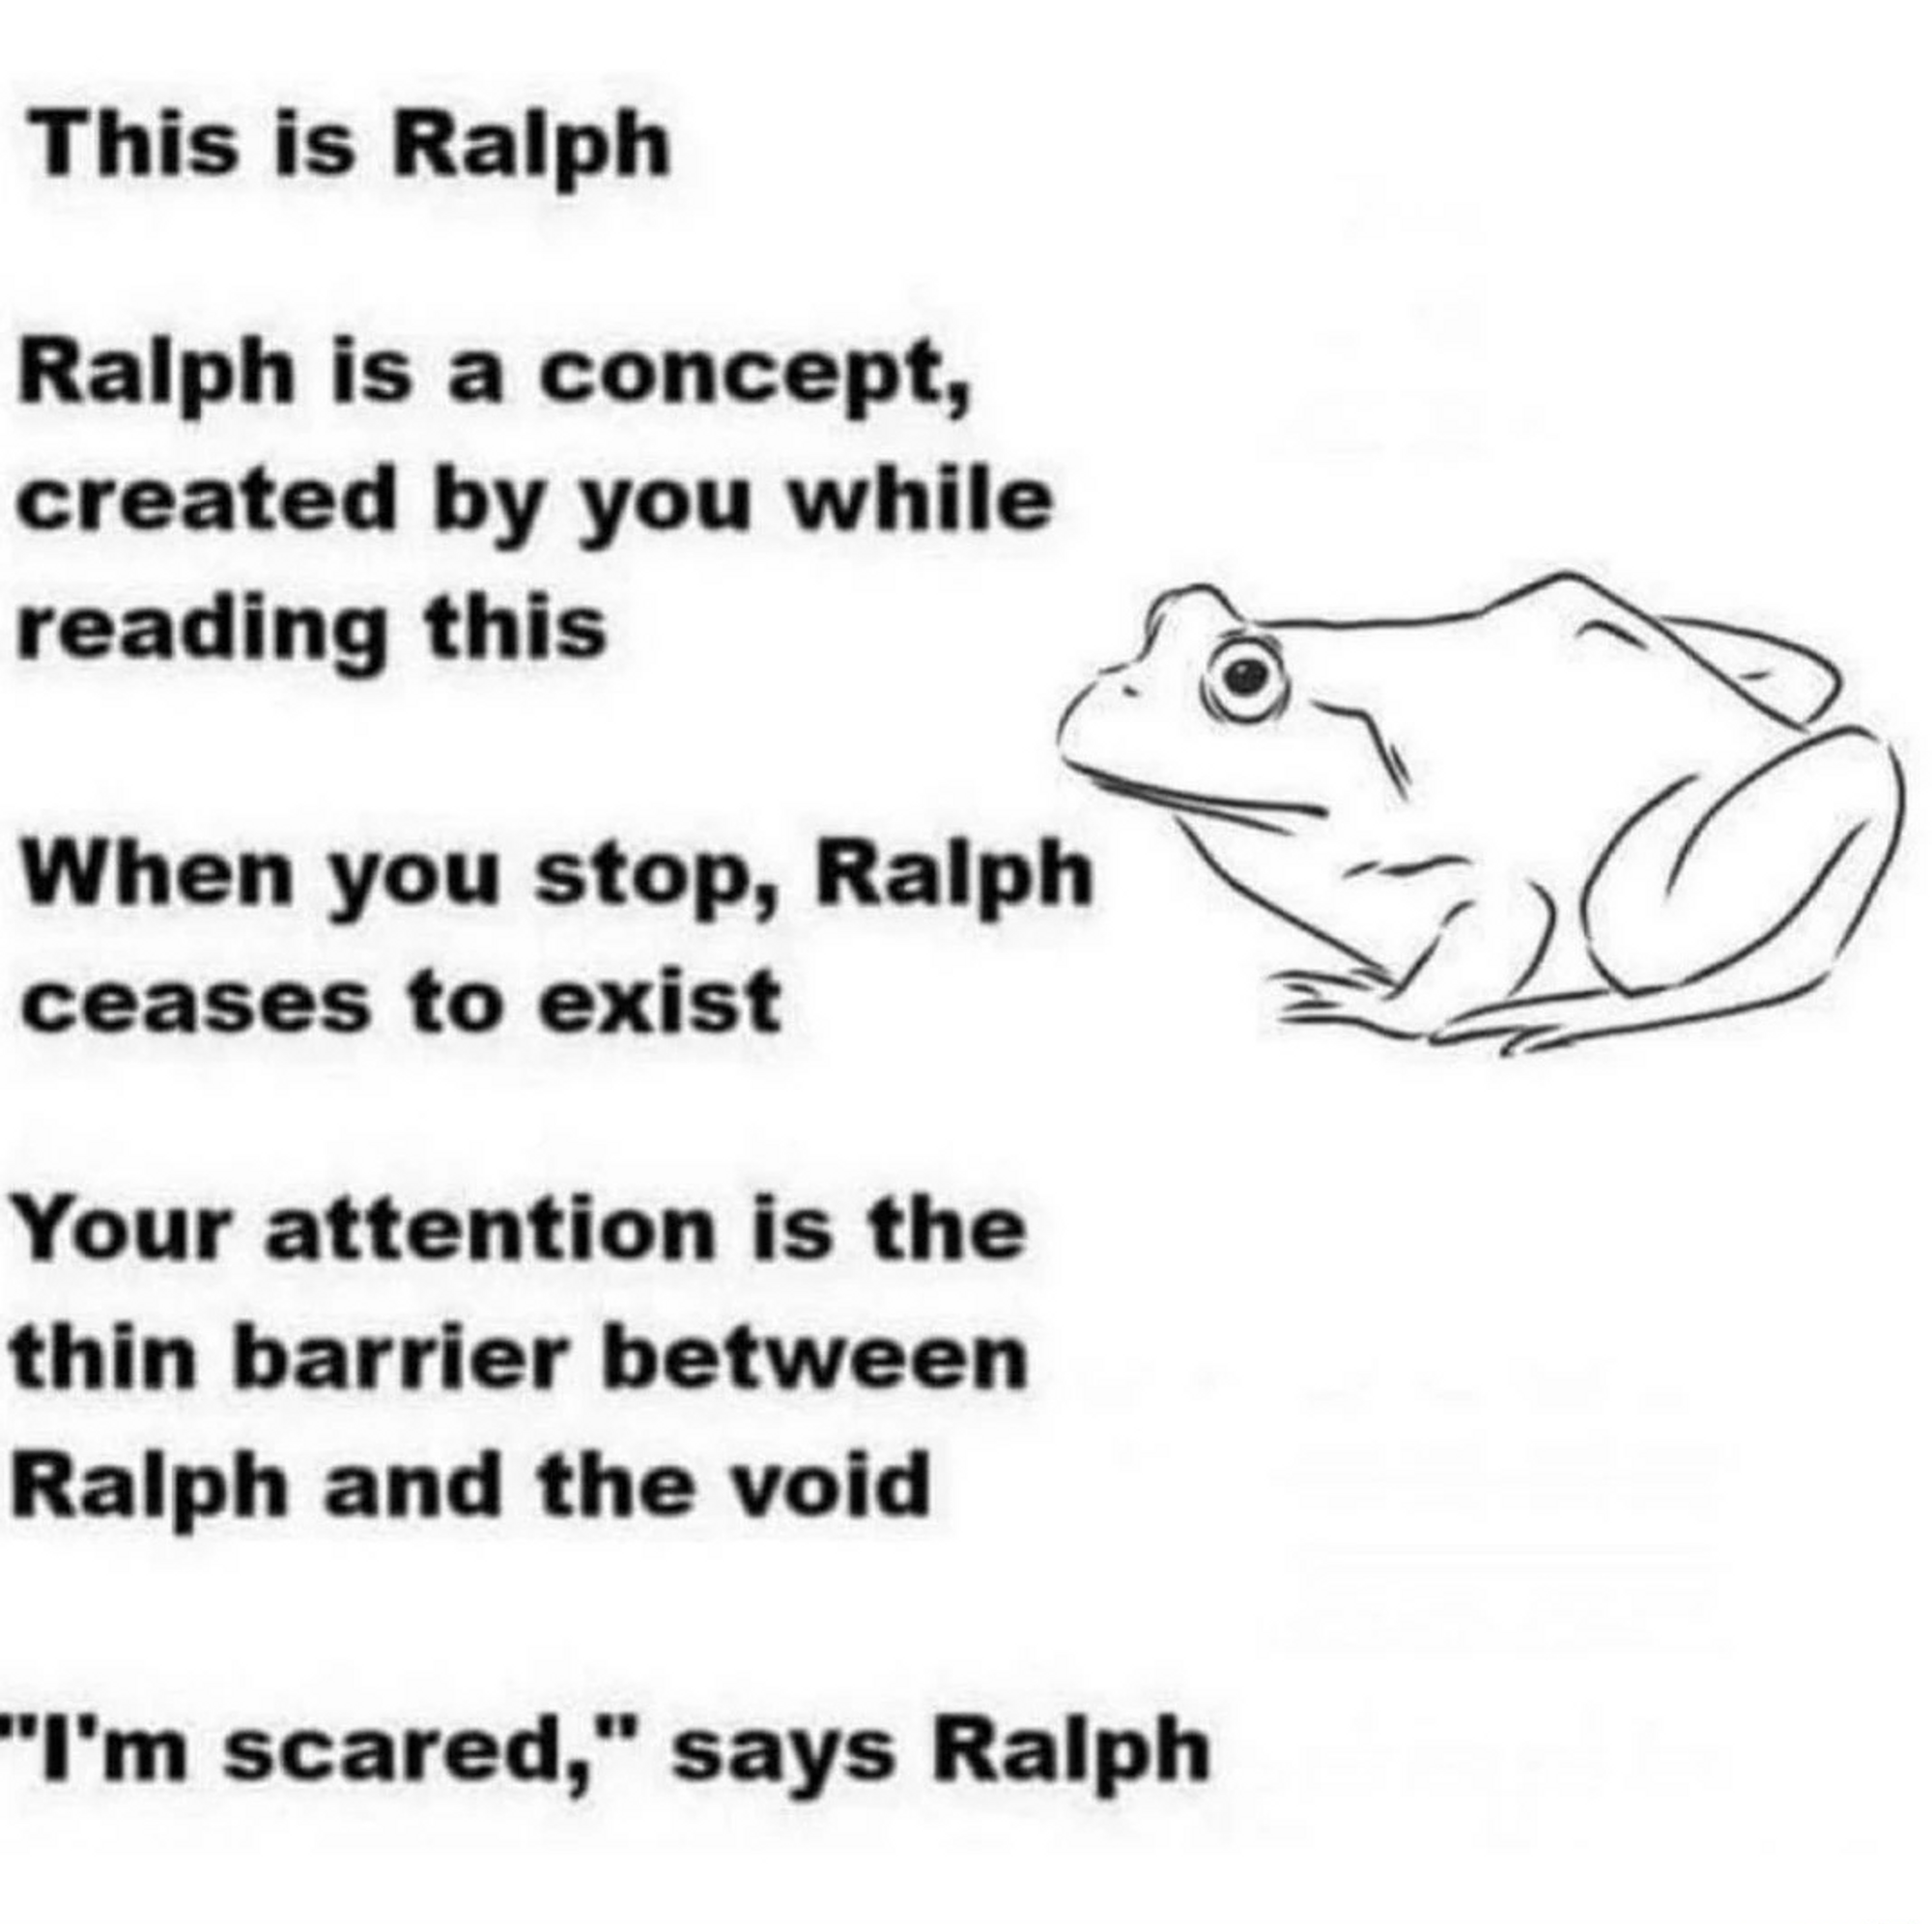 Ralph the frog